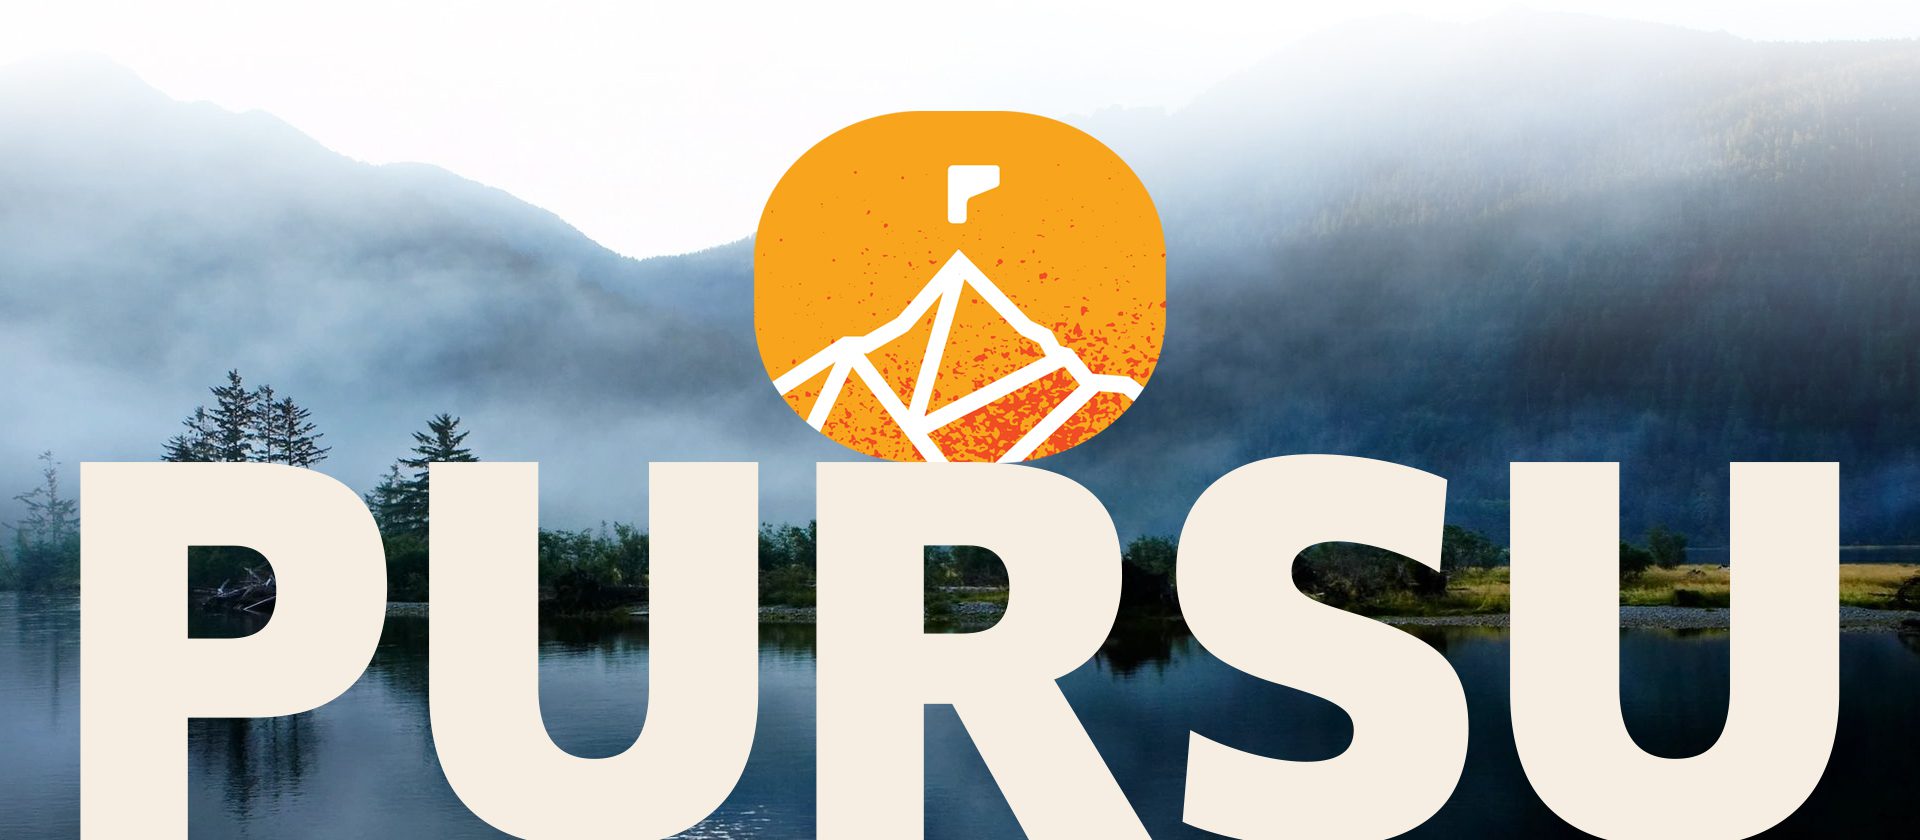 A picture of the word urs with mountains in the background.